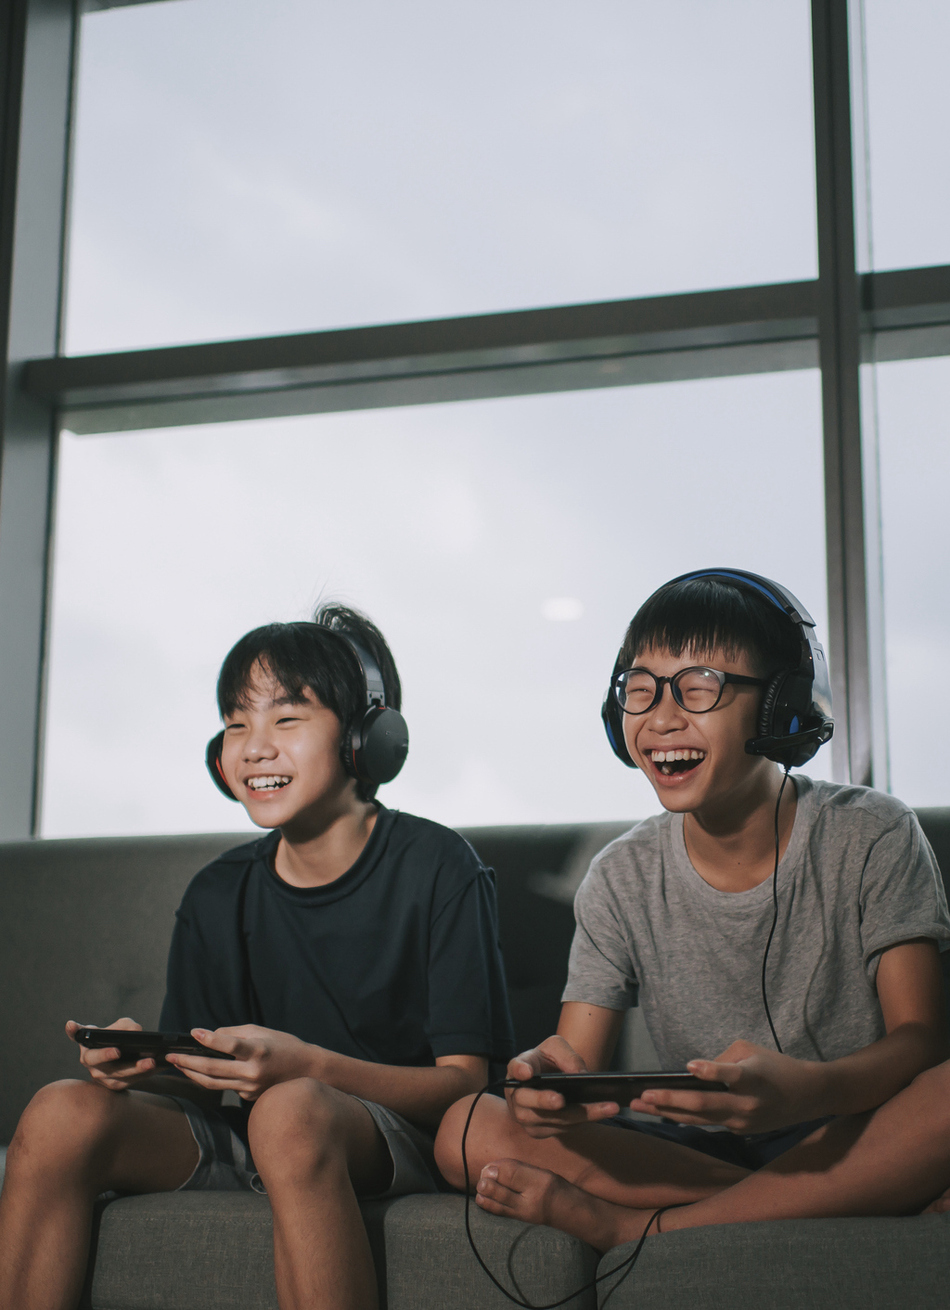 The Video Games Your Child Plays Has an Effect on Their Behavior